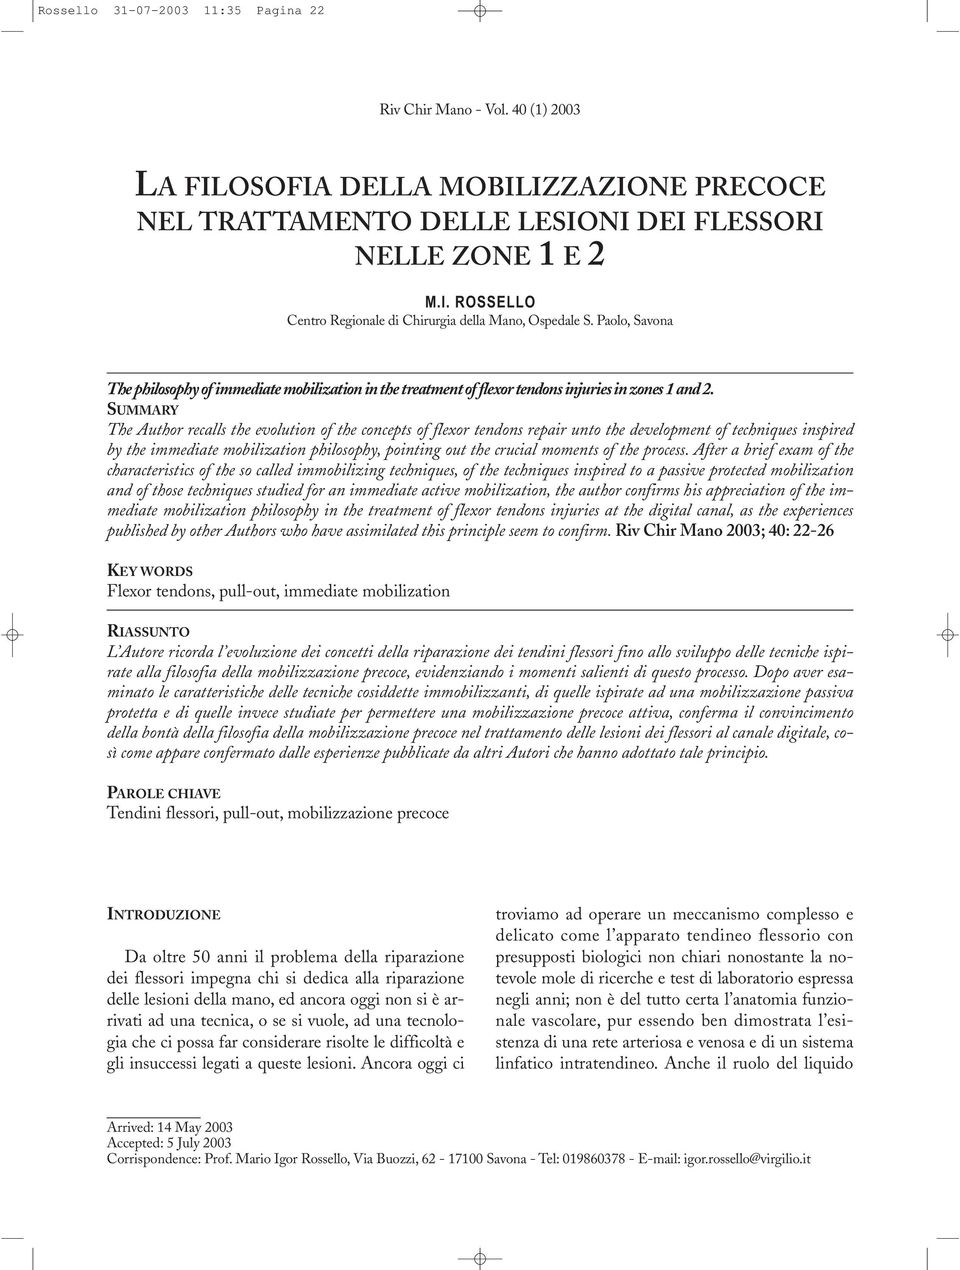 Paolo, Savona The philosophy of immediate mobilization in the treatment of flexor tendons injuries in zones 1 and 2.